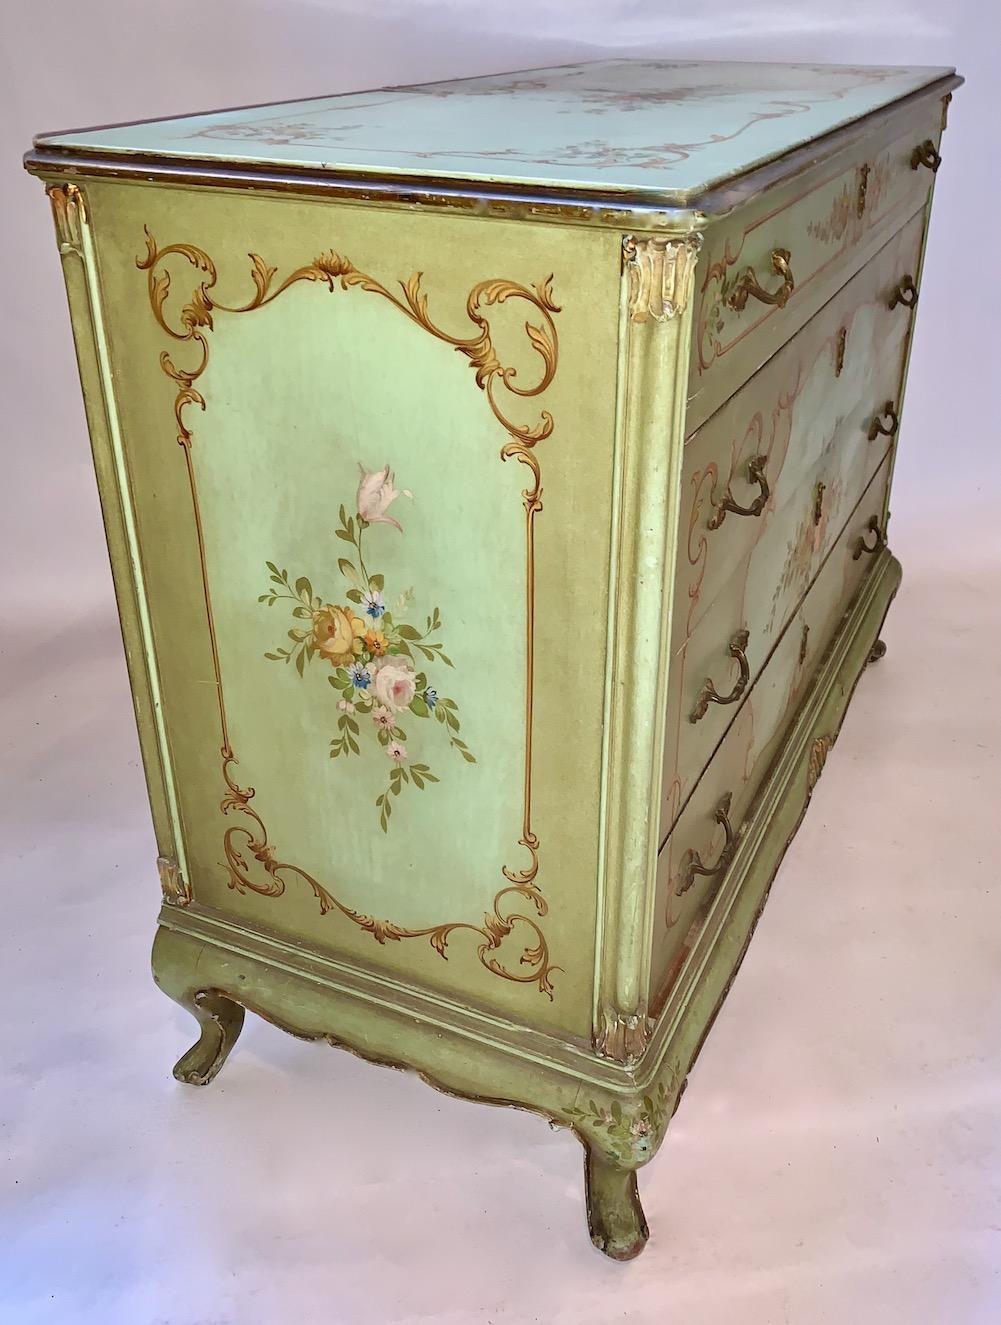 Wood Early 20th C. Venetian style Hand Painted and Decorated Partial Gilt Dresser For Sale